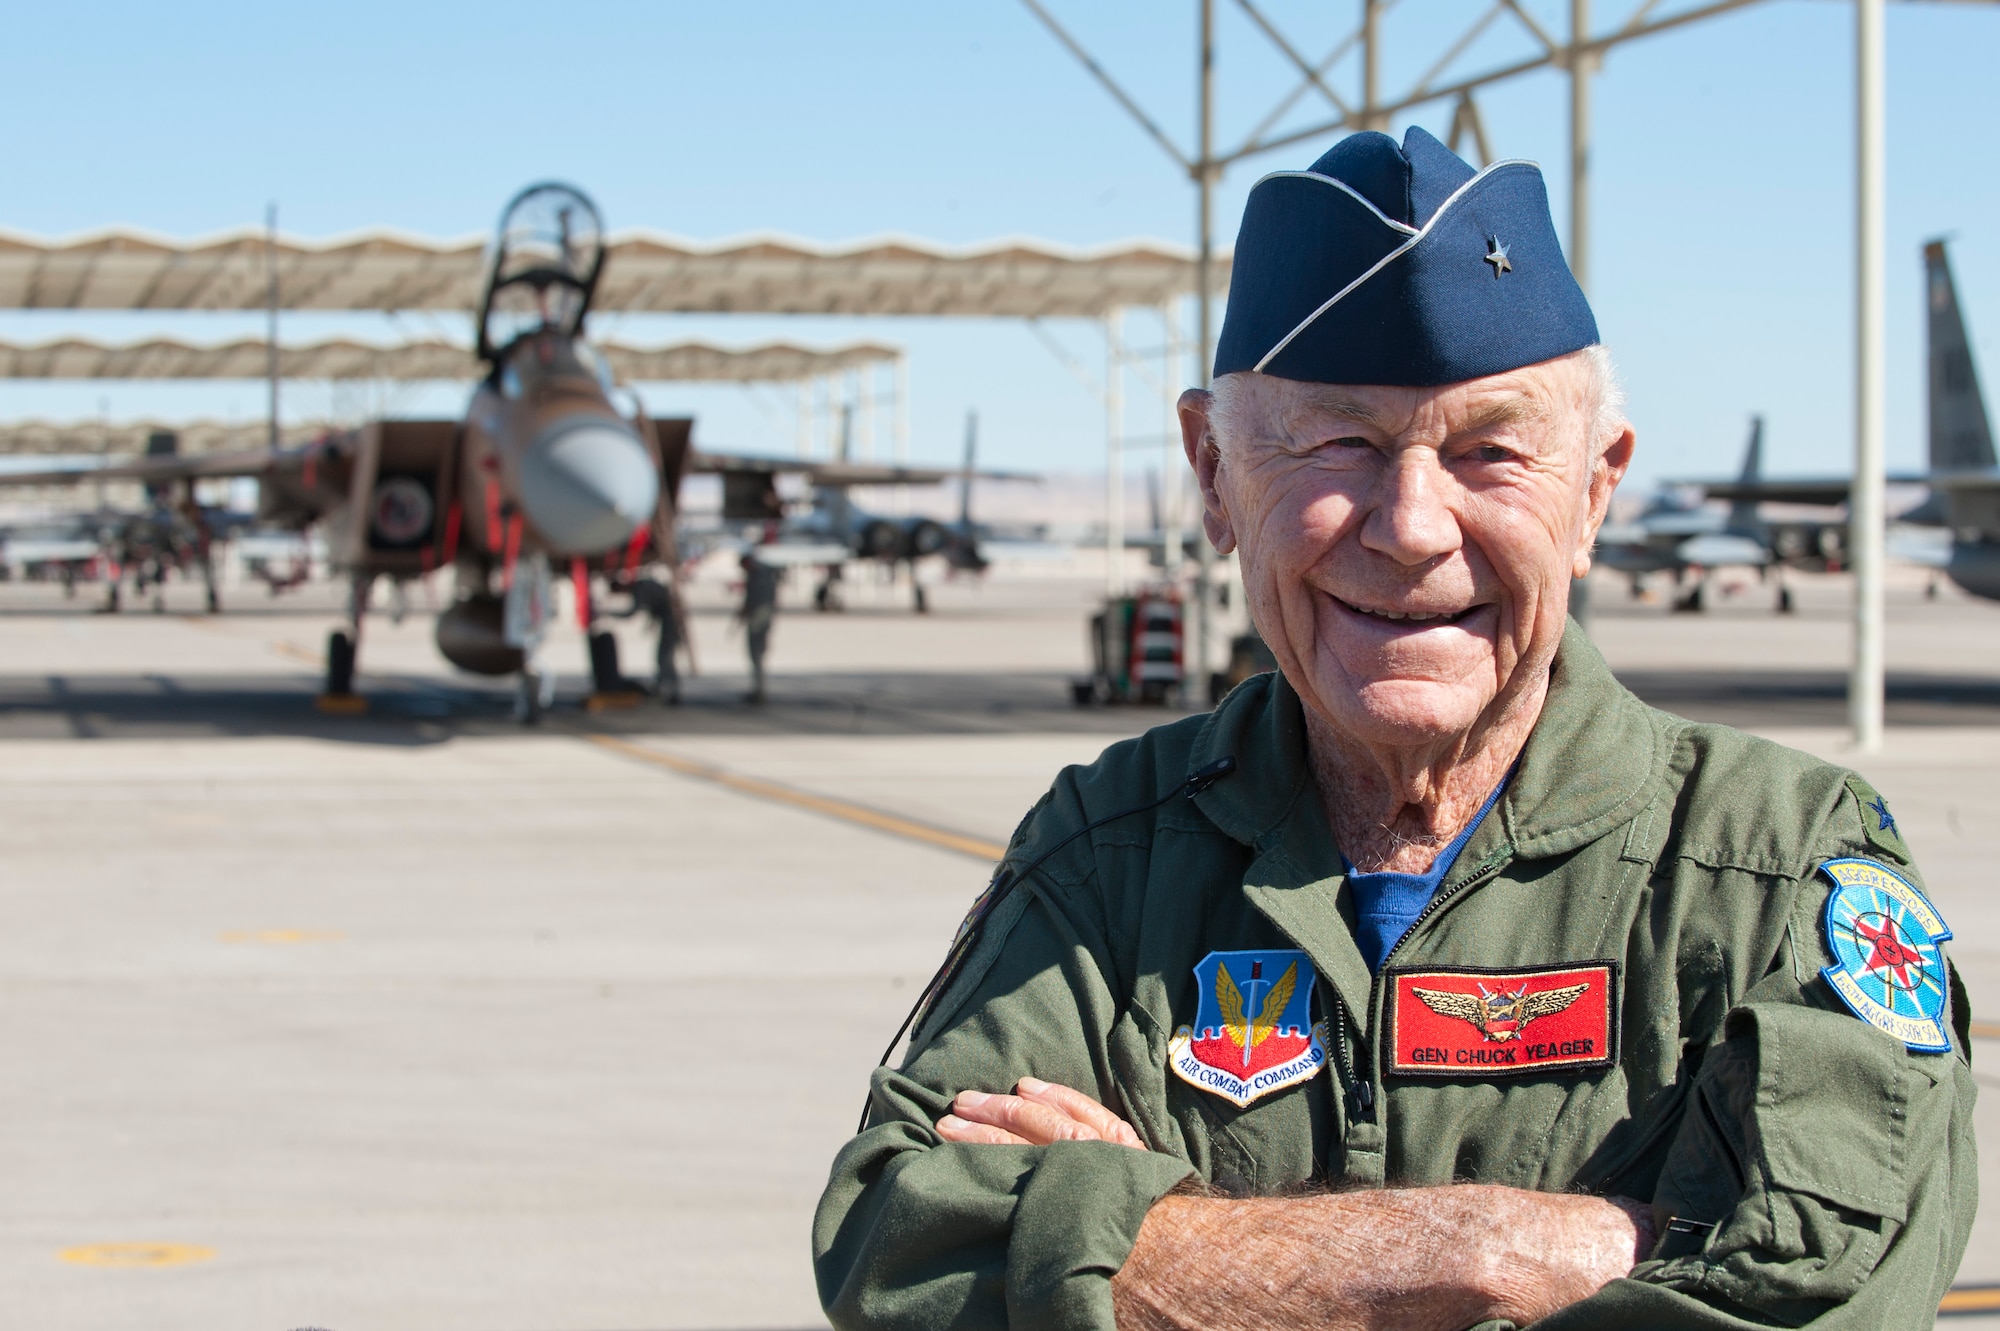 Retired United States Air Force Brig. Gen. Charles E. "Chuck" Yeager poses for photographers after returning from his 65th anniversary of breaking the sound barrier flight aboard a 65th Aggressor Squadron F-15D Eagle piloted by Capt. David Vincent, 65th AGRS, at Nellis Air Force Base, Nev., Oct. 14, 2012. Yeager became the first man to break the sound barrier Oct. 14, 1947, over Edwards Air Force Base, Calif. (U.S. Air Force photo by Lawrence Crespo)